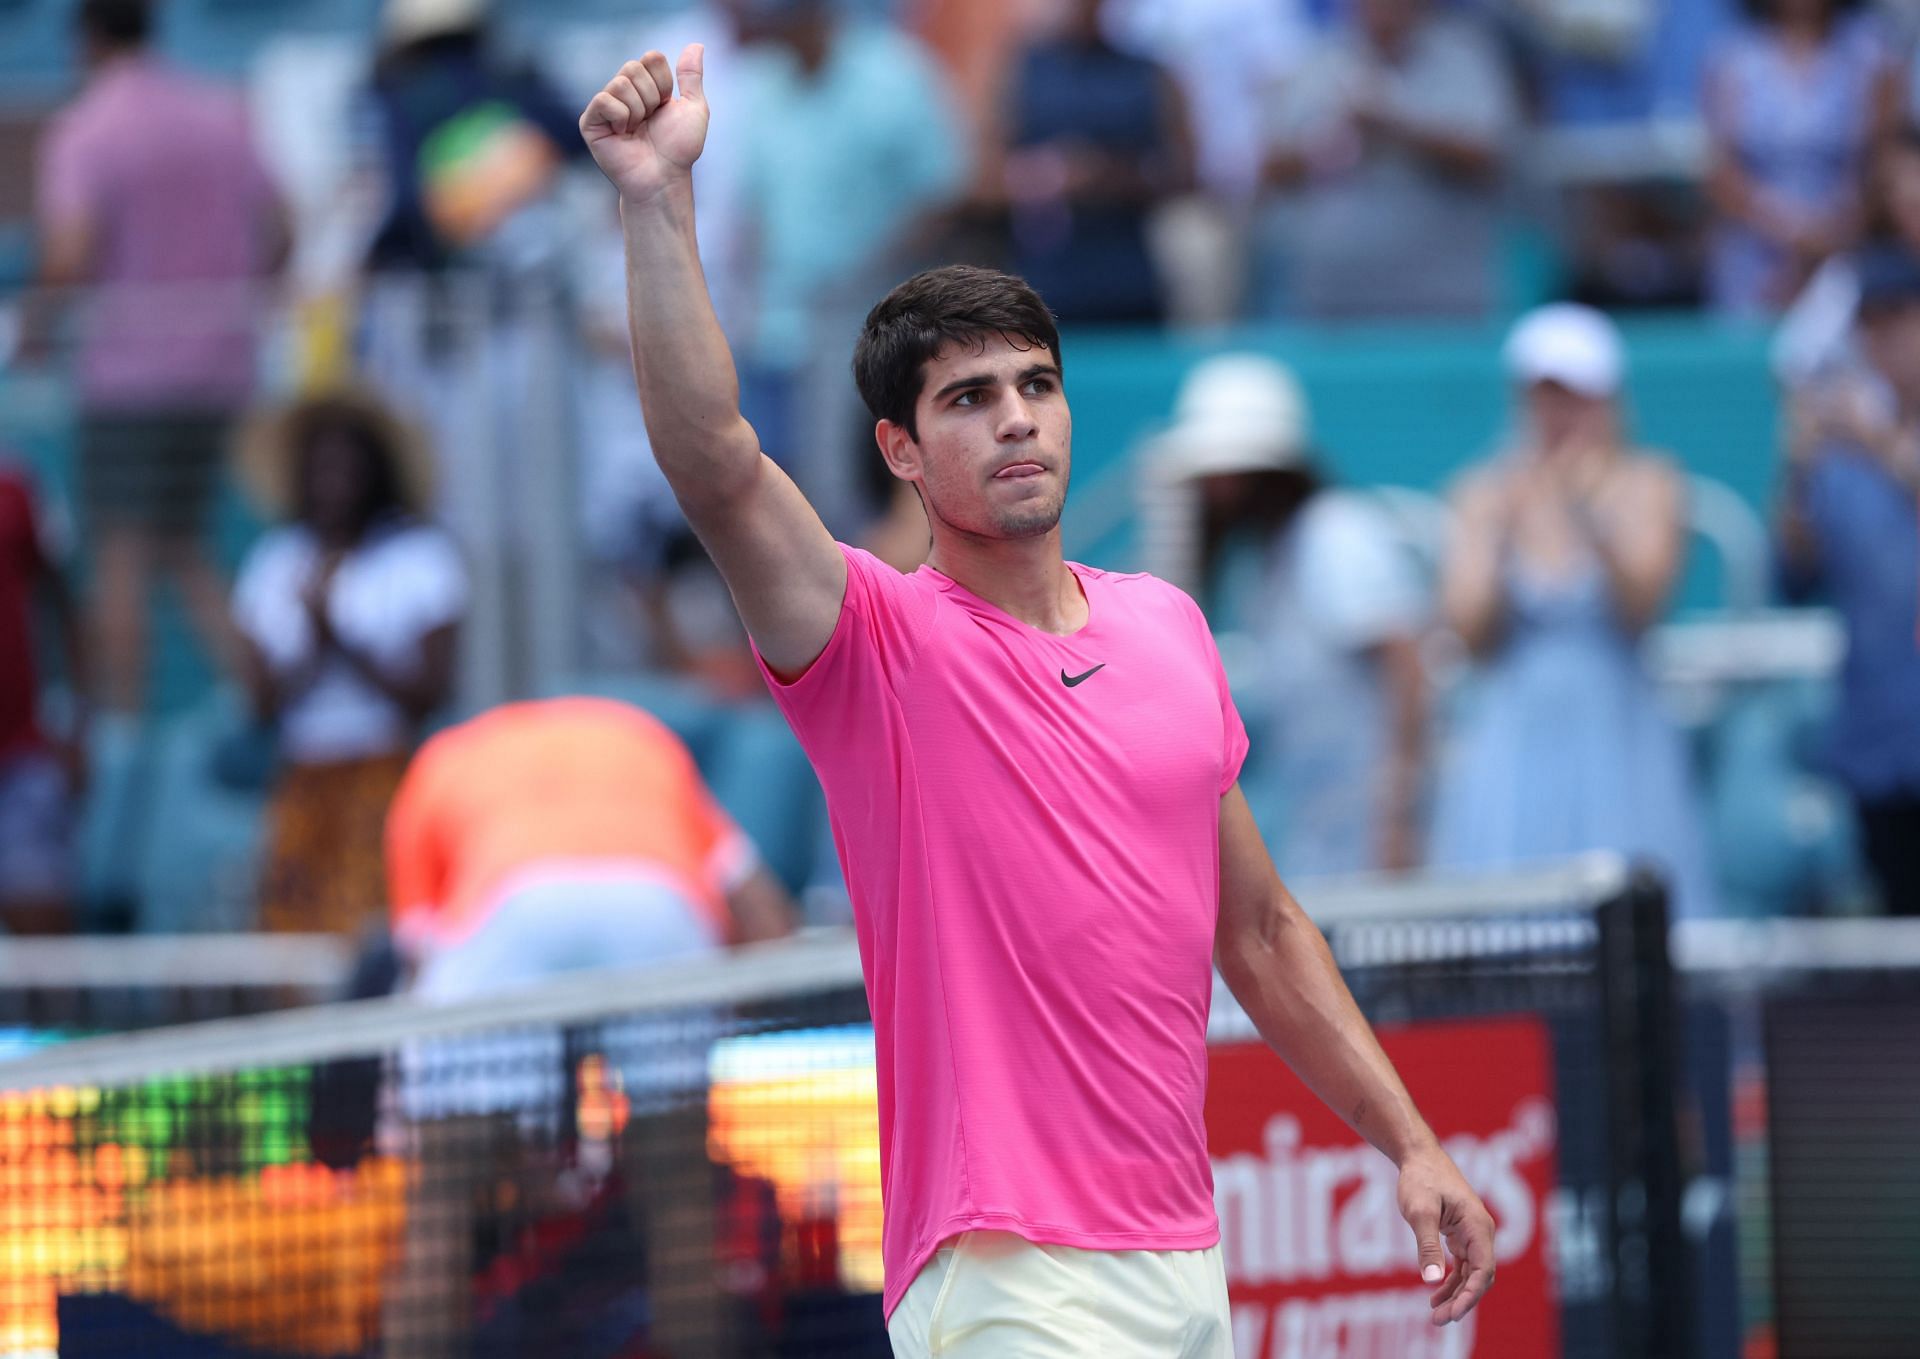 Miami Open 2023 Schedule Today TV schedule, start time, order of play, live stream details and more Day 11